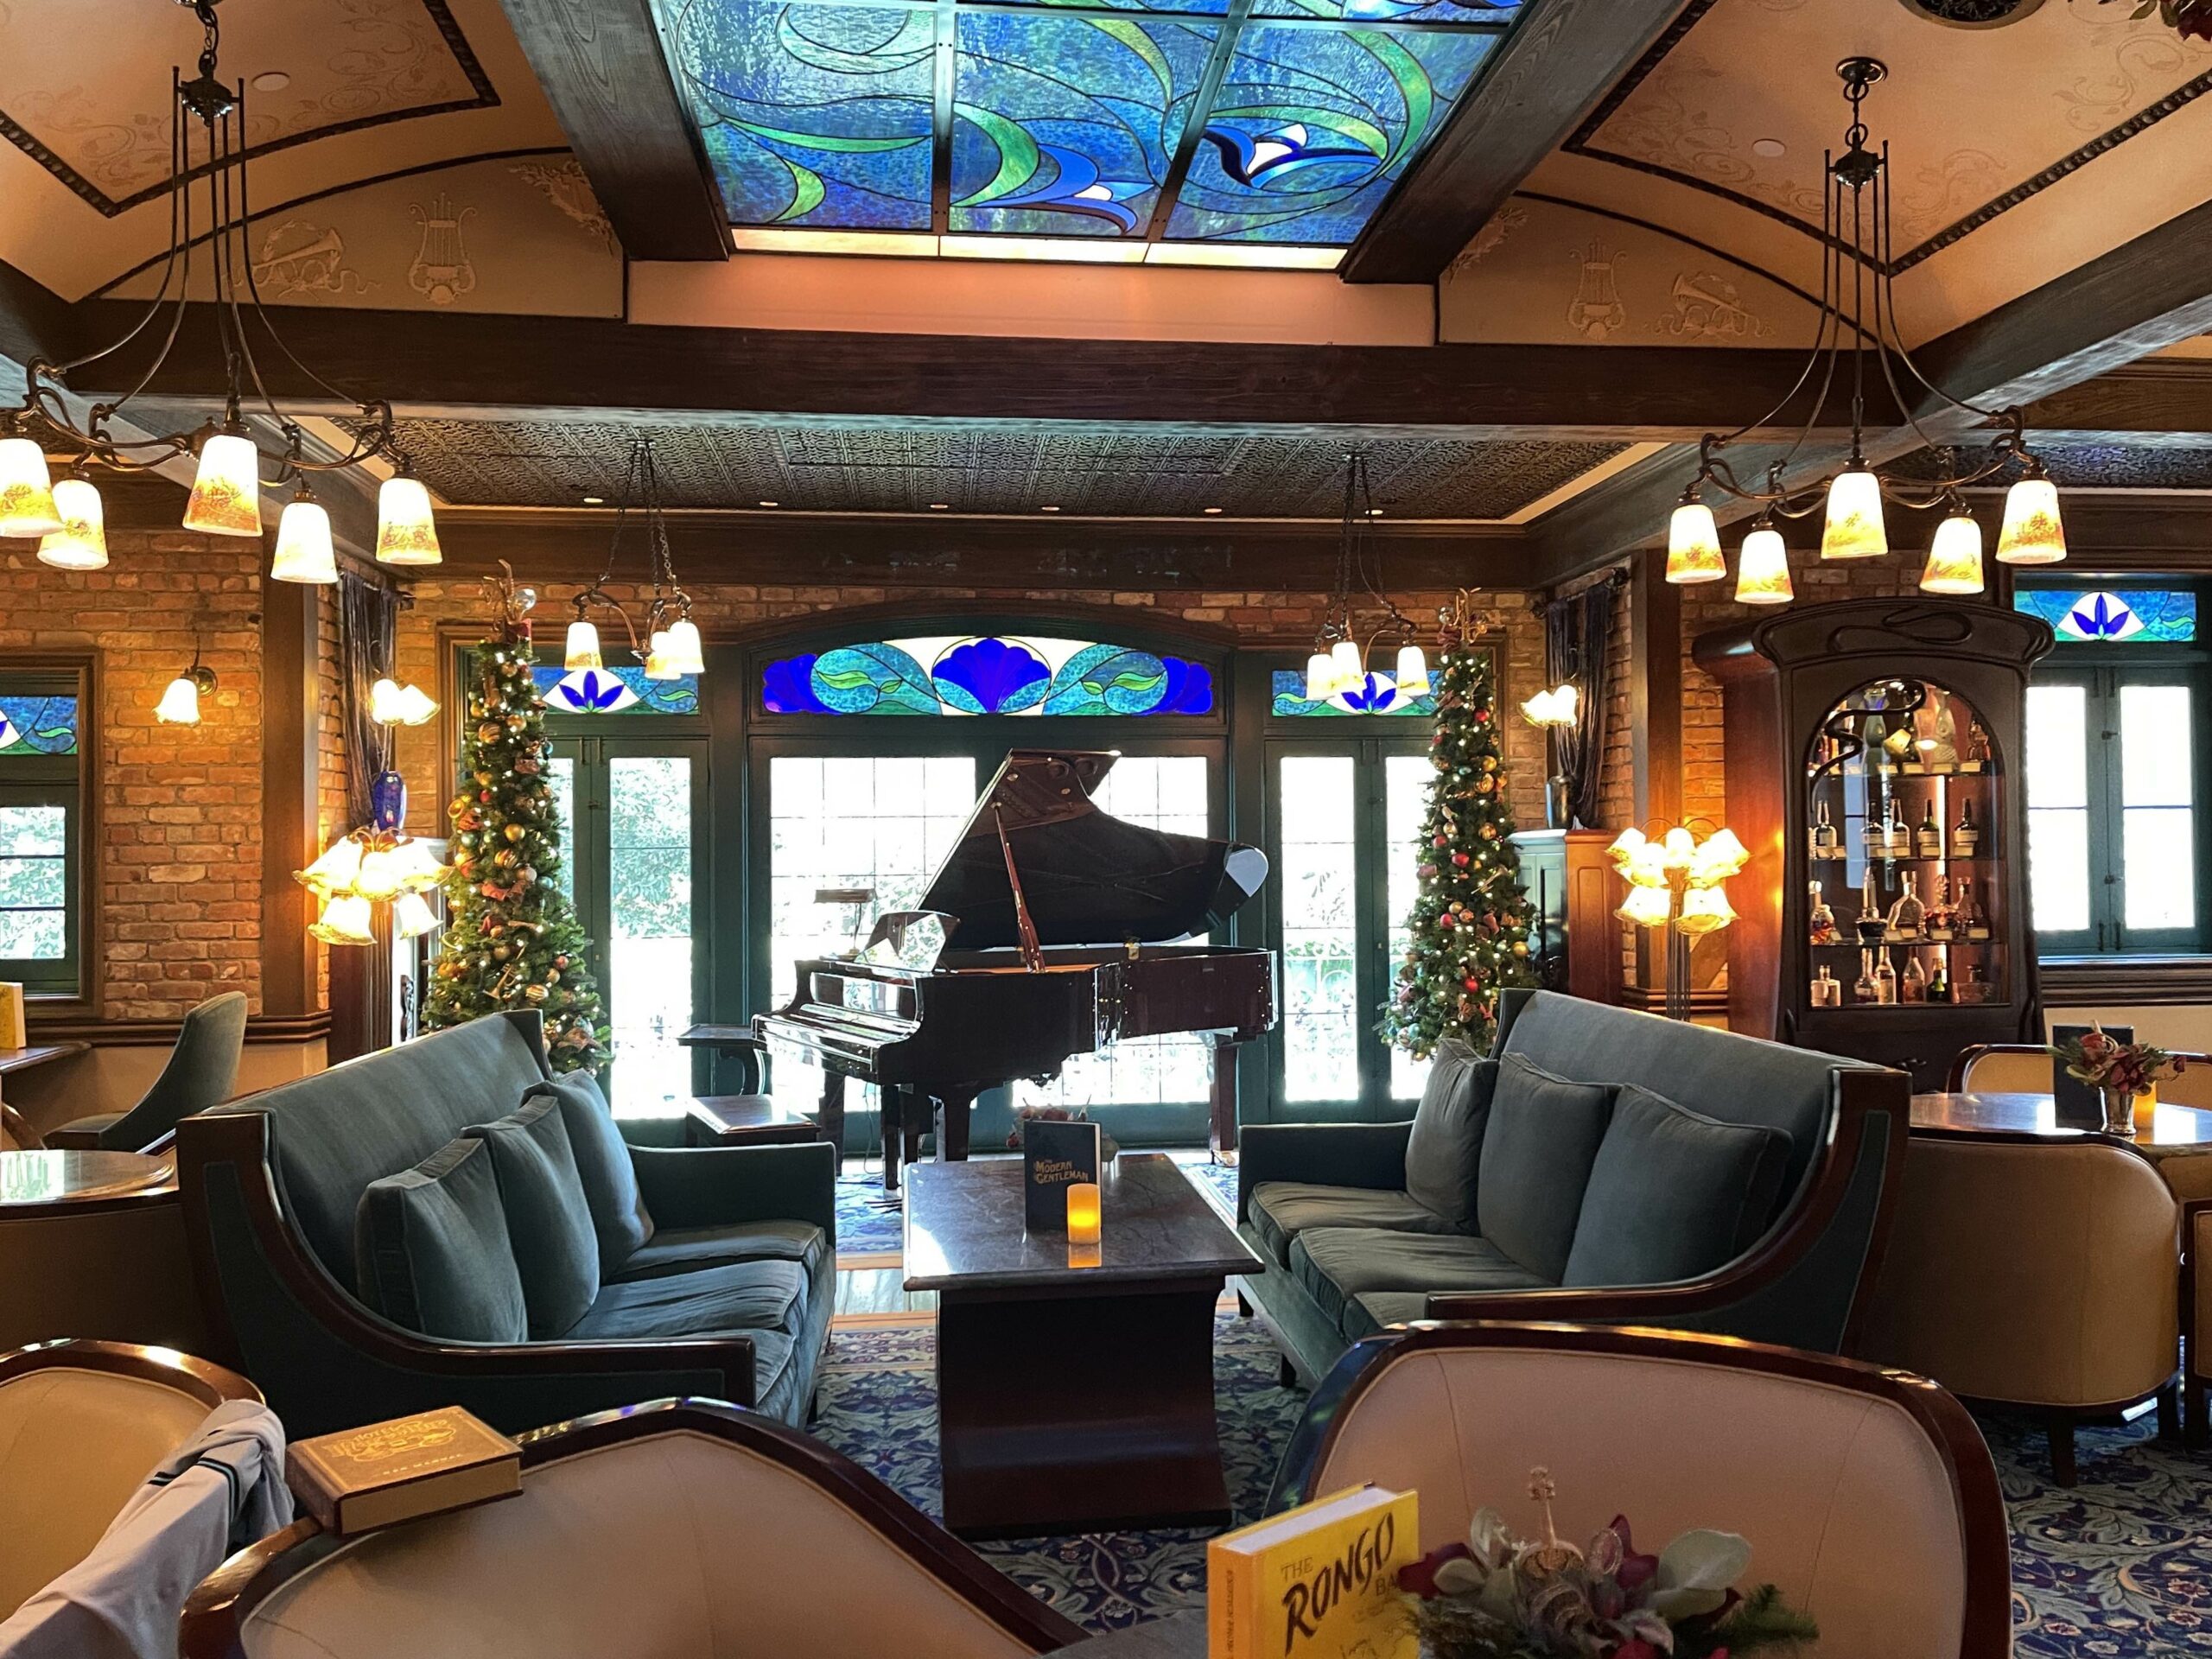 Panoramic view of lounge at Club 33.